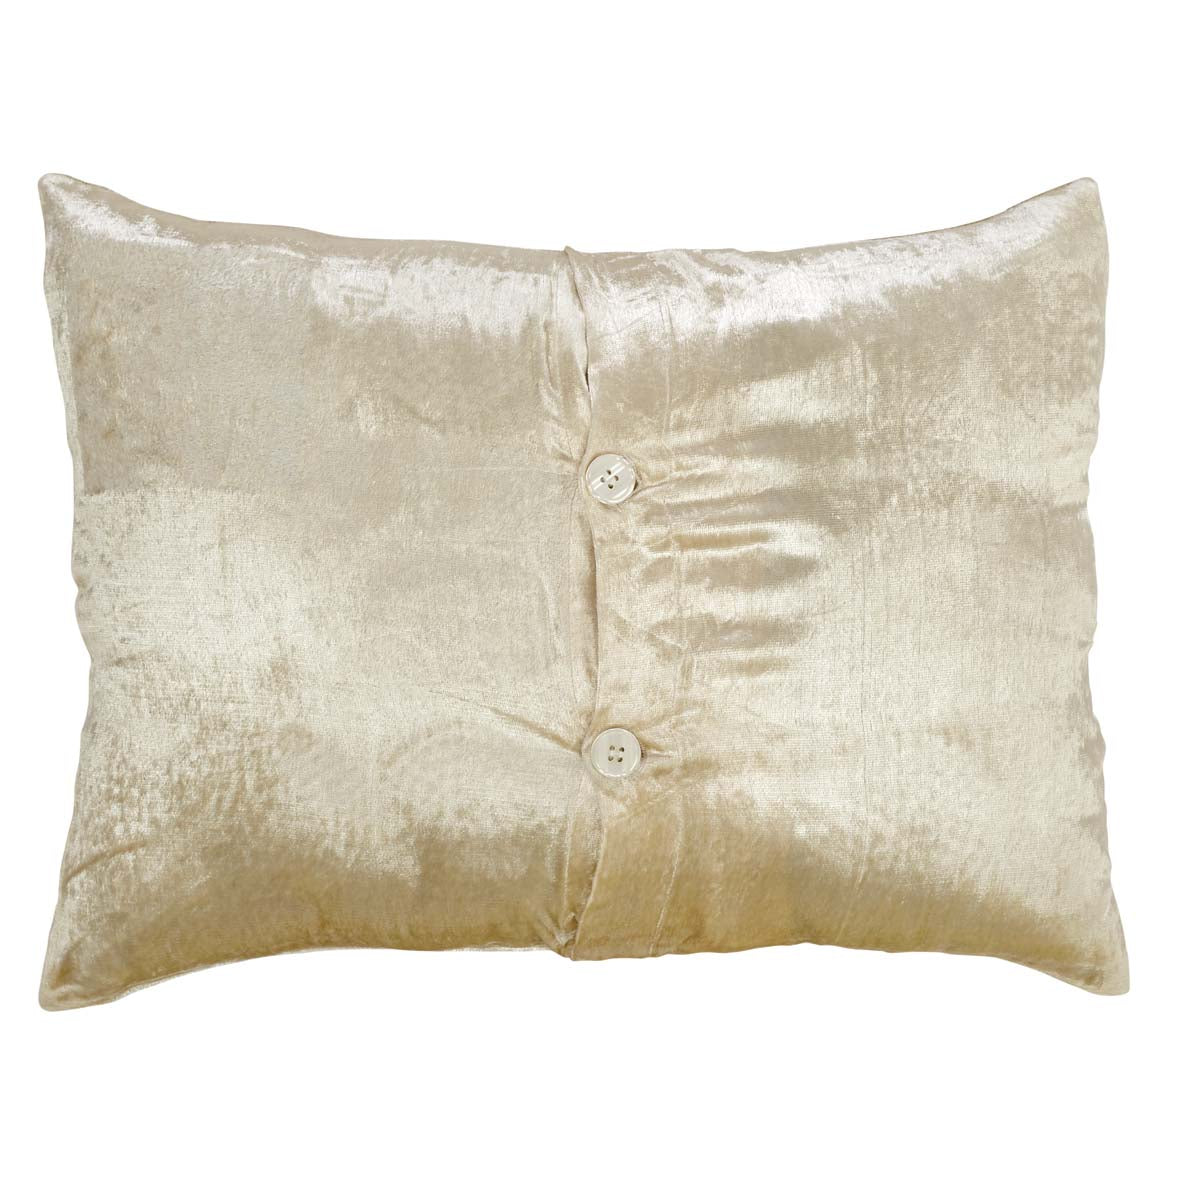 Memories Creme and Gold Swirls 14" x 18" Holiday Pillow